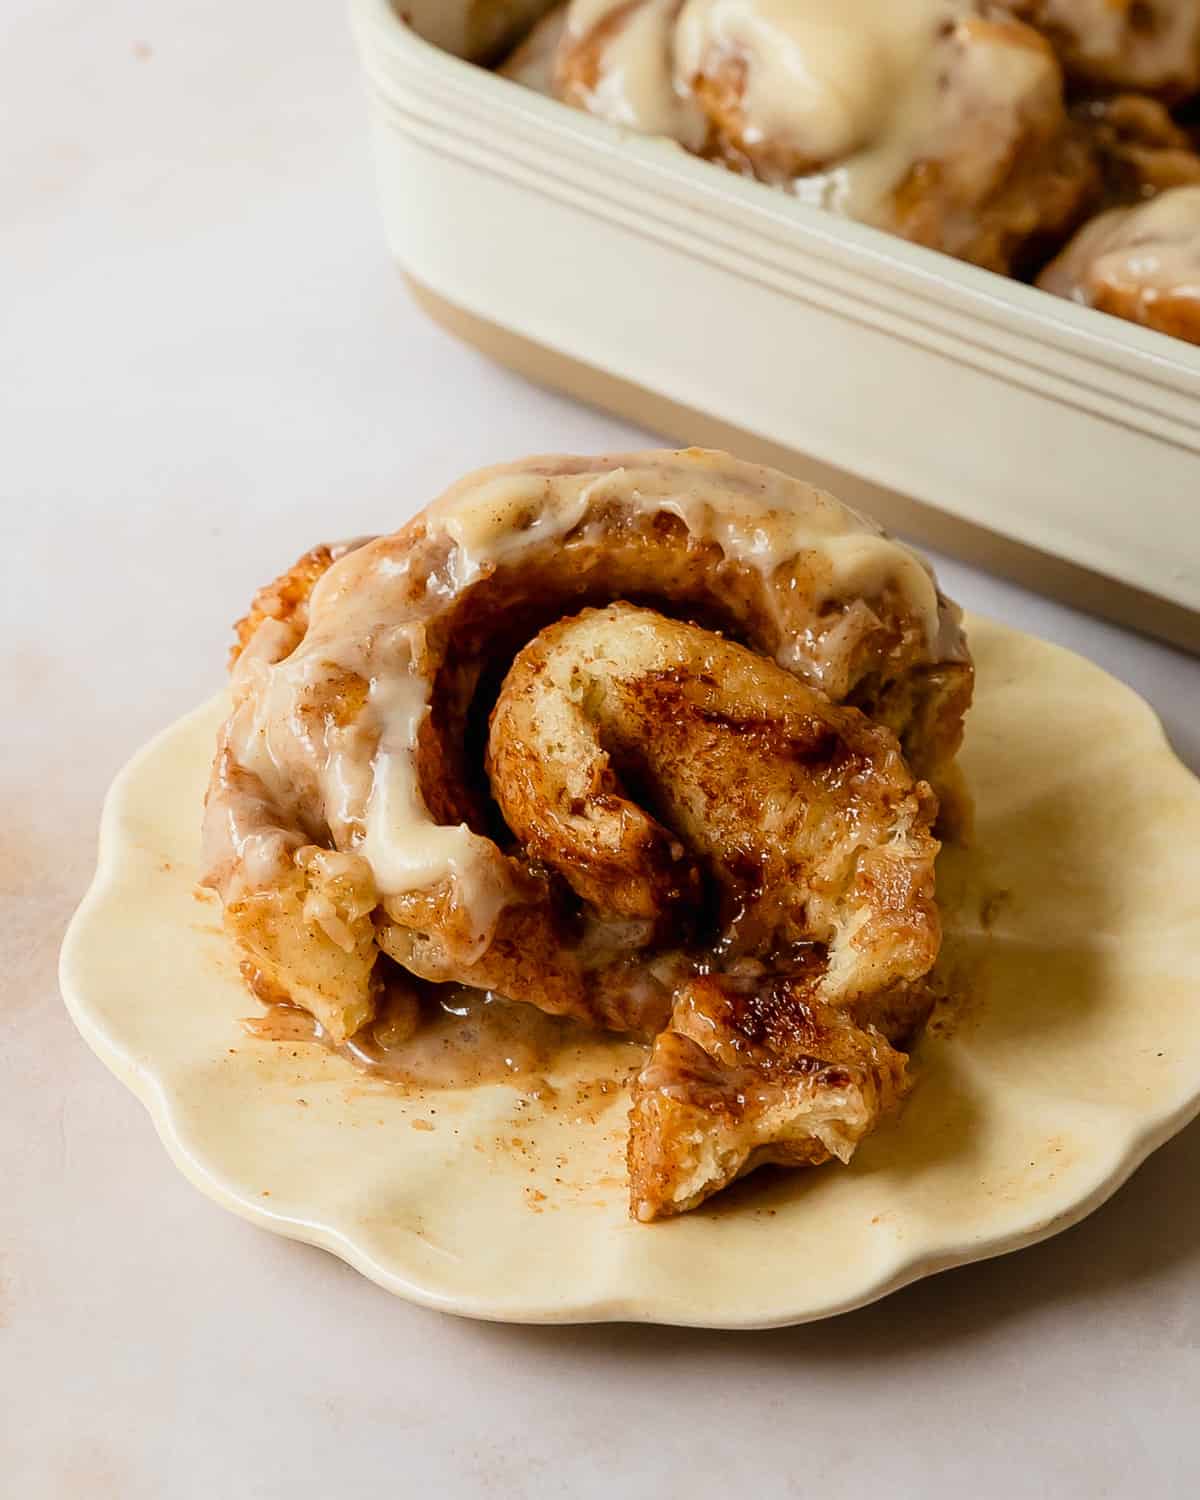 Cinnamon rolls with heavy cream is a clever and easy to make Tik Tok cinnamon roll hack that transforms canned cinnamon buns into light, fluffy and moist, bakery worthy cinnamon rolls. These deliciously gooey cinnamon rolls are topped with a brown sugar and cinnamon butter before baking and with a luscious cream cheese icing after baking. Grab your favorite store bought cinnamon rolls and make a decadent and easy breakfast treat everyone is sure to love!